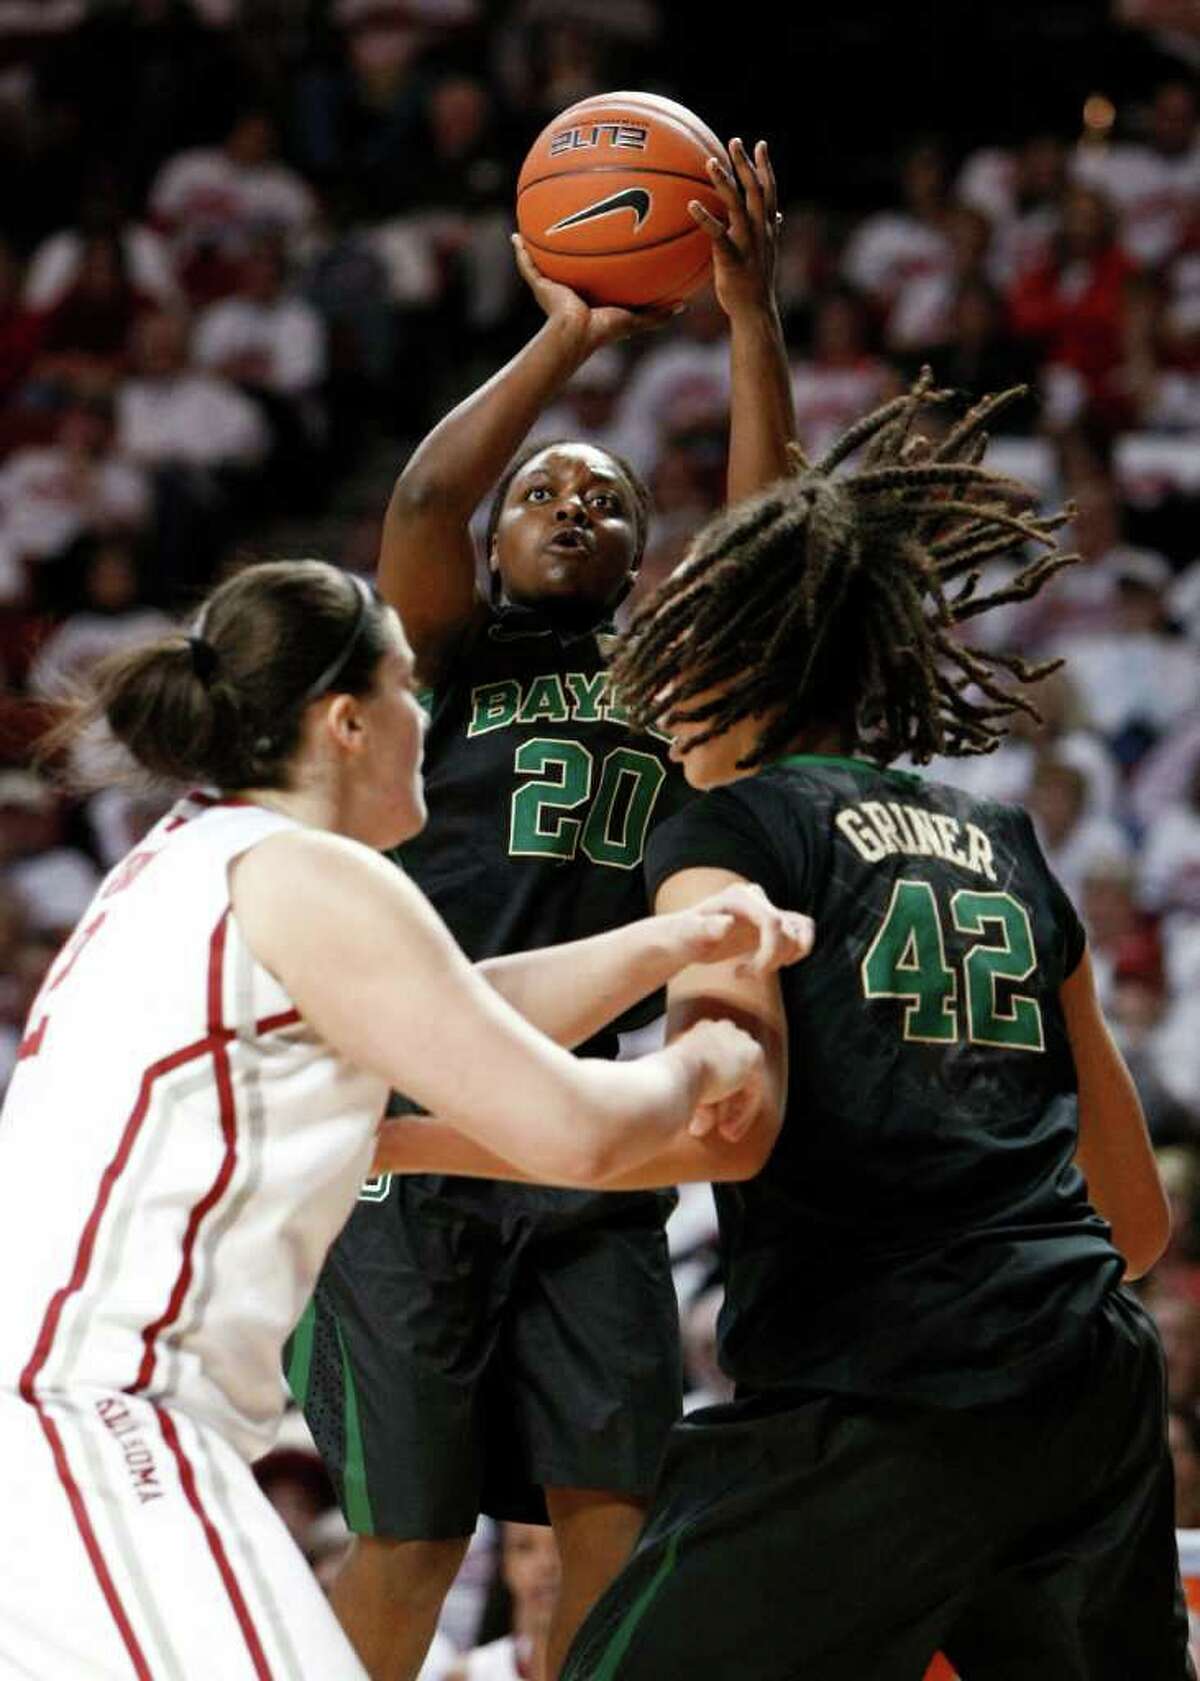 Baylor’s Terran Condrey (middle), who had 14 points, gets room to fire off a jumper in the first half Thursday.